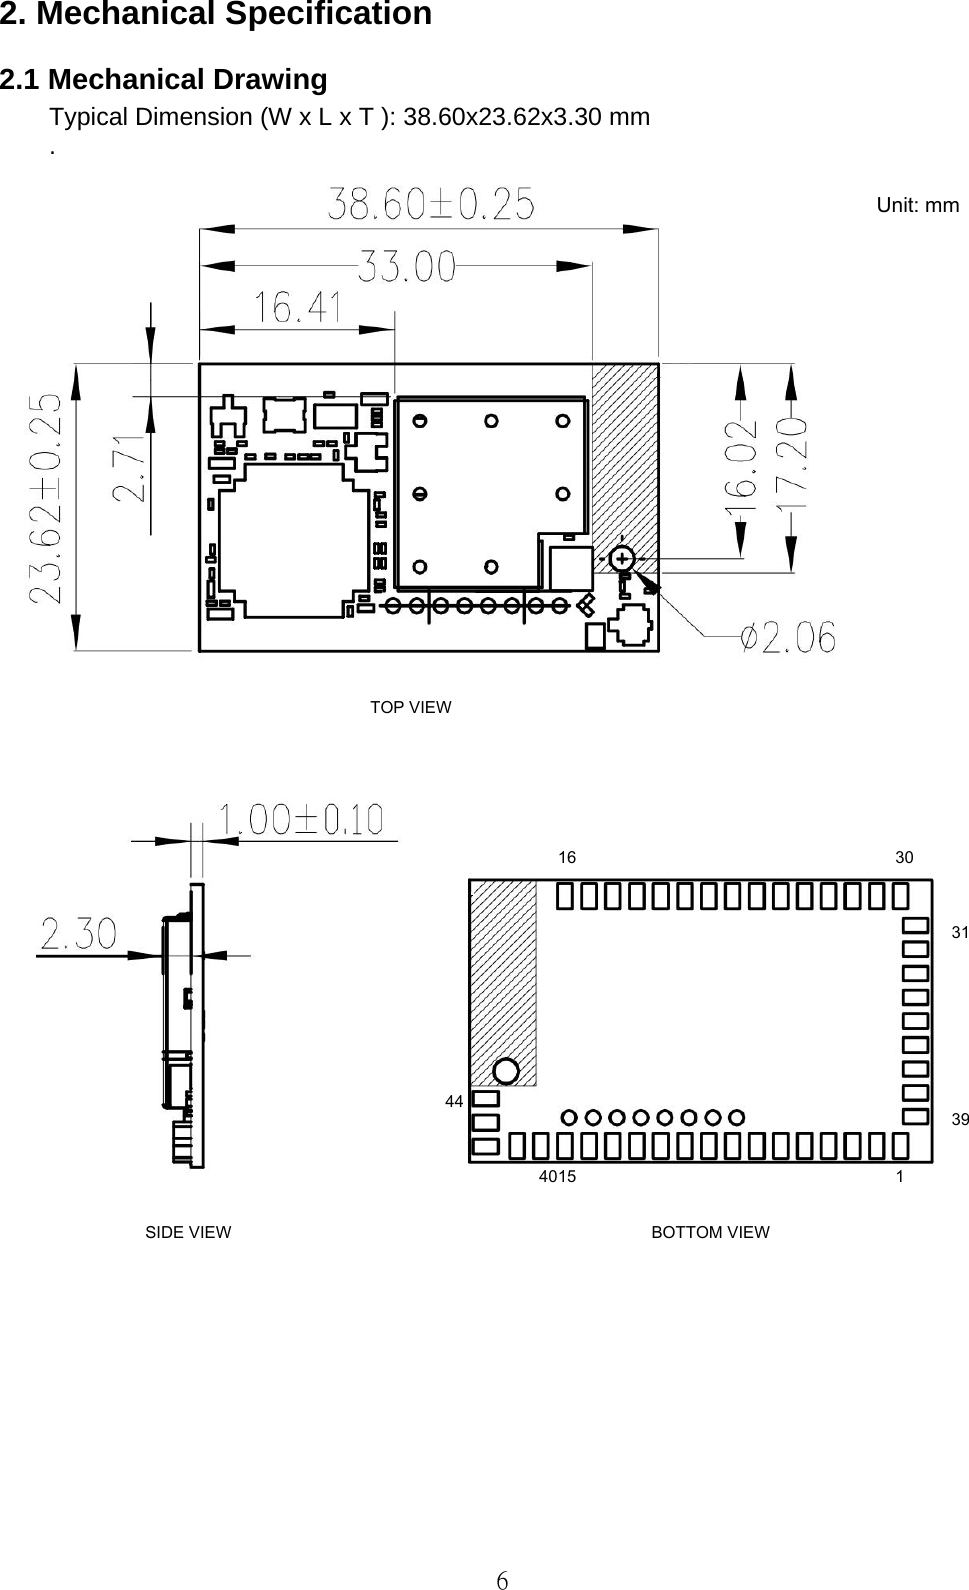   6 2. Mechanical Specification 2.1 Mechanical Drawing   Typical Dimension (W x L x T ): 38.60x23.62x3.30 mm .        TOP VIEWBOTTOM VIEW SIDE VIEW Unit: mm 31391 15404416 30